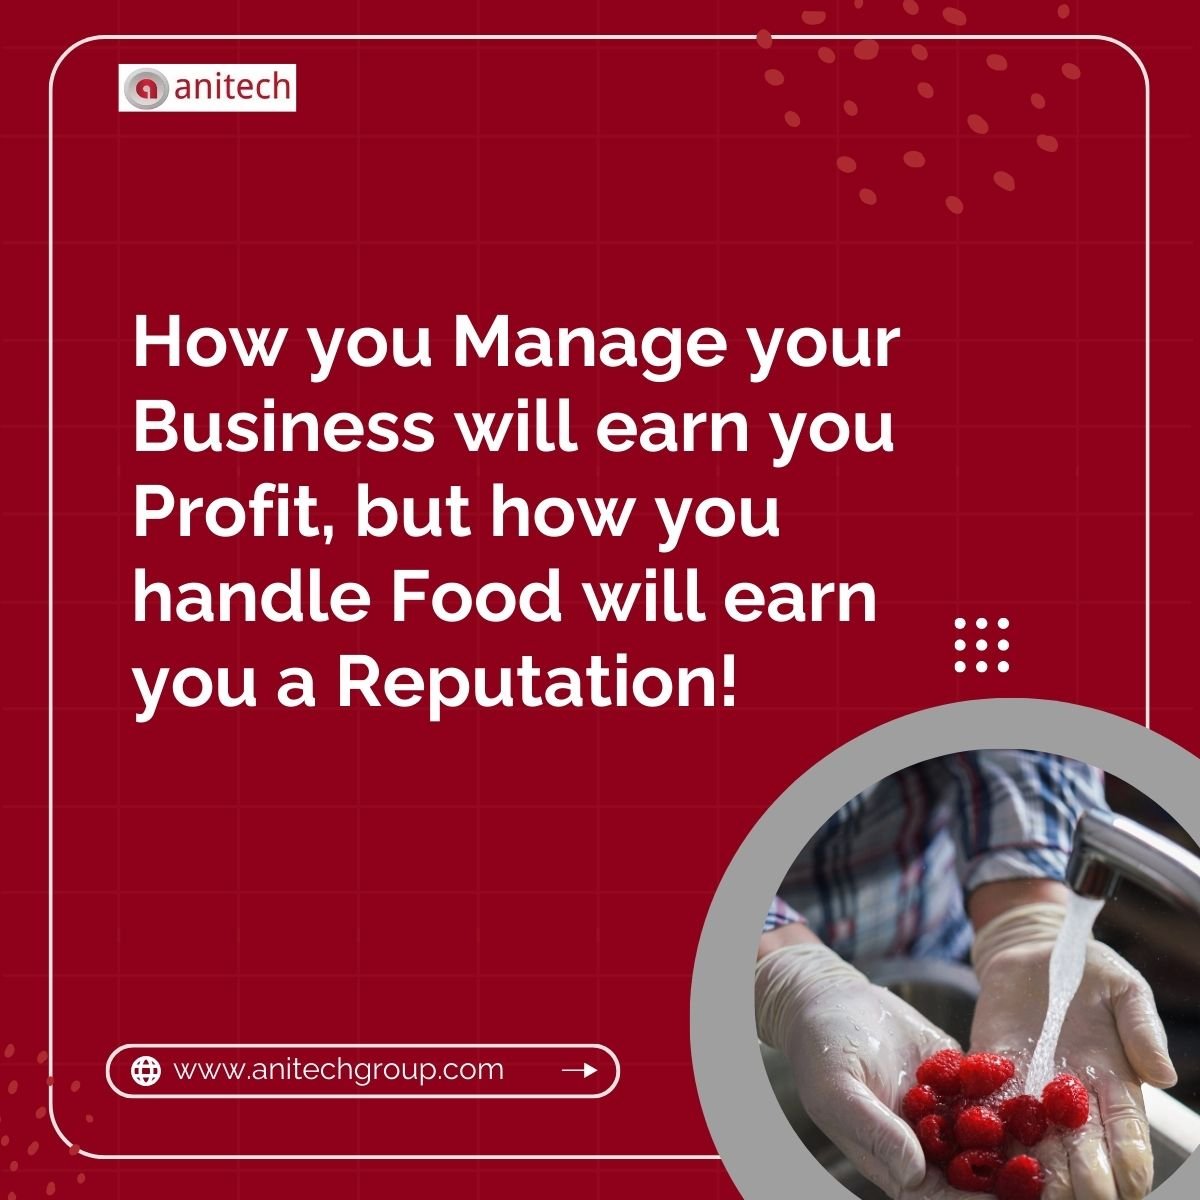 Elevate your brand by prioritising #FoodSafety & earning customer trust
Discover how our services can help you maintain top-notch #foodhandling practices 
Call now-1300 802 163,e-mail – sales@anitechgroup.com

 #BrandReputation #foodsafetypractices #foodsafetyconsultant #anitech